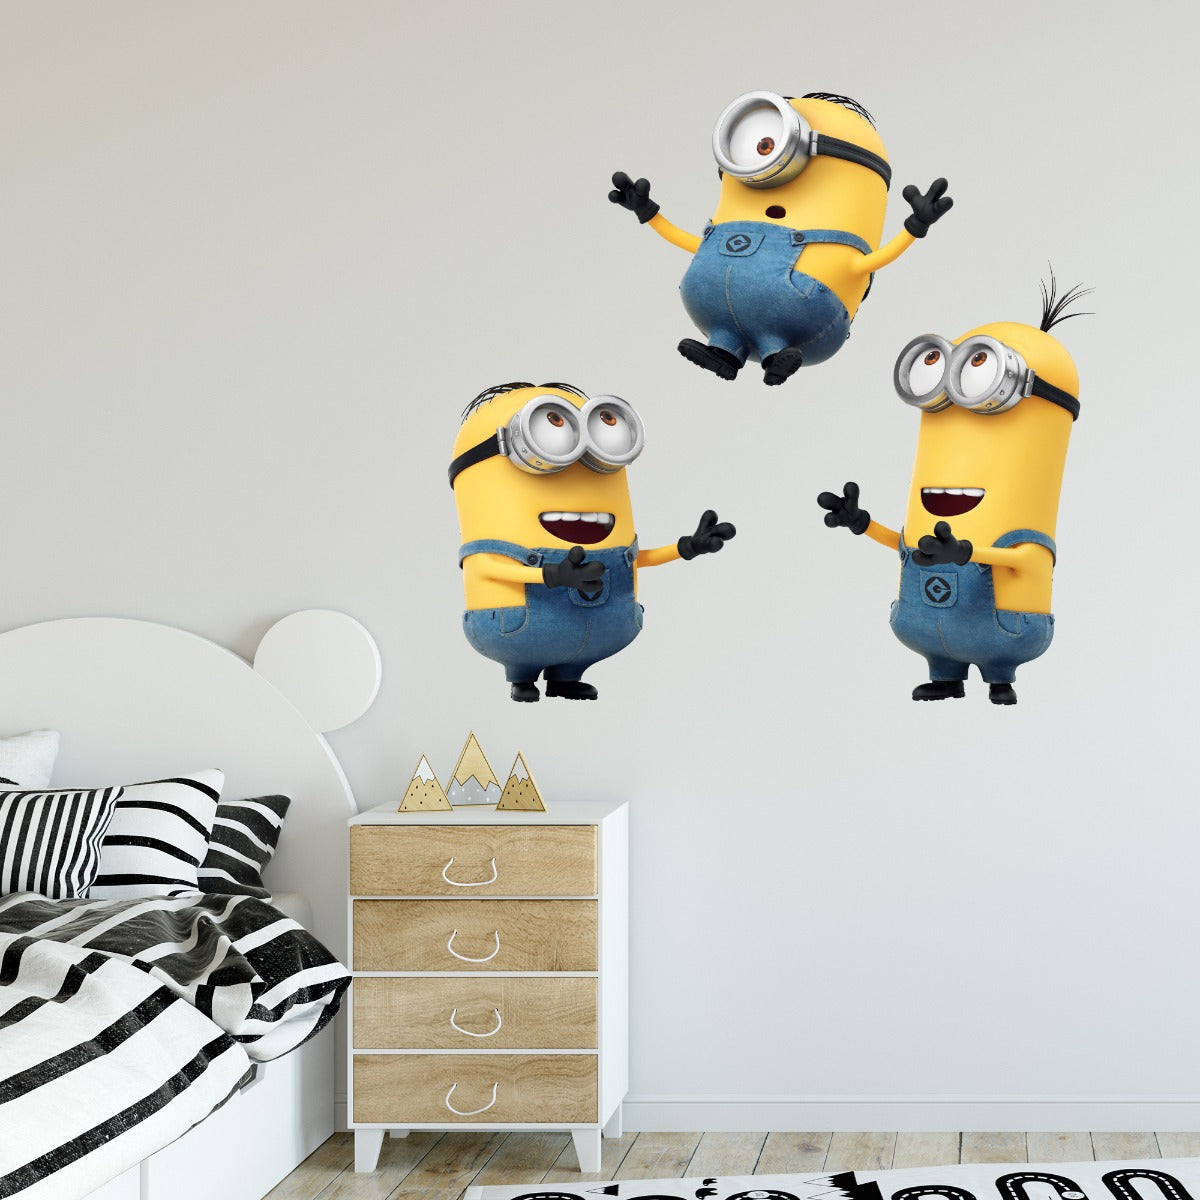 Despicable Me 3 Minions Playing Wall Sticker